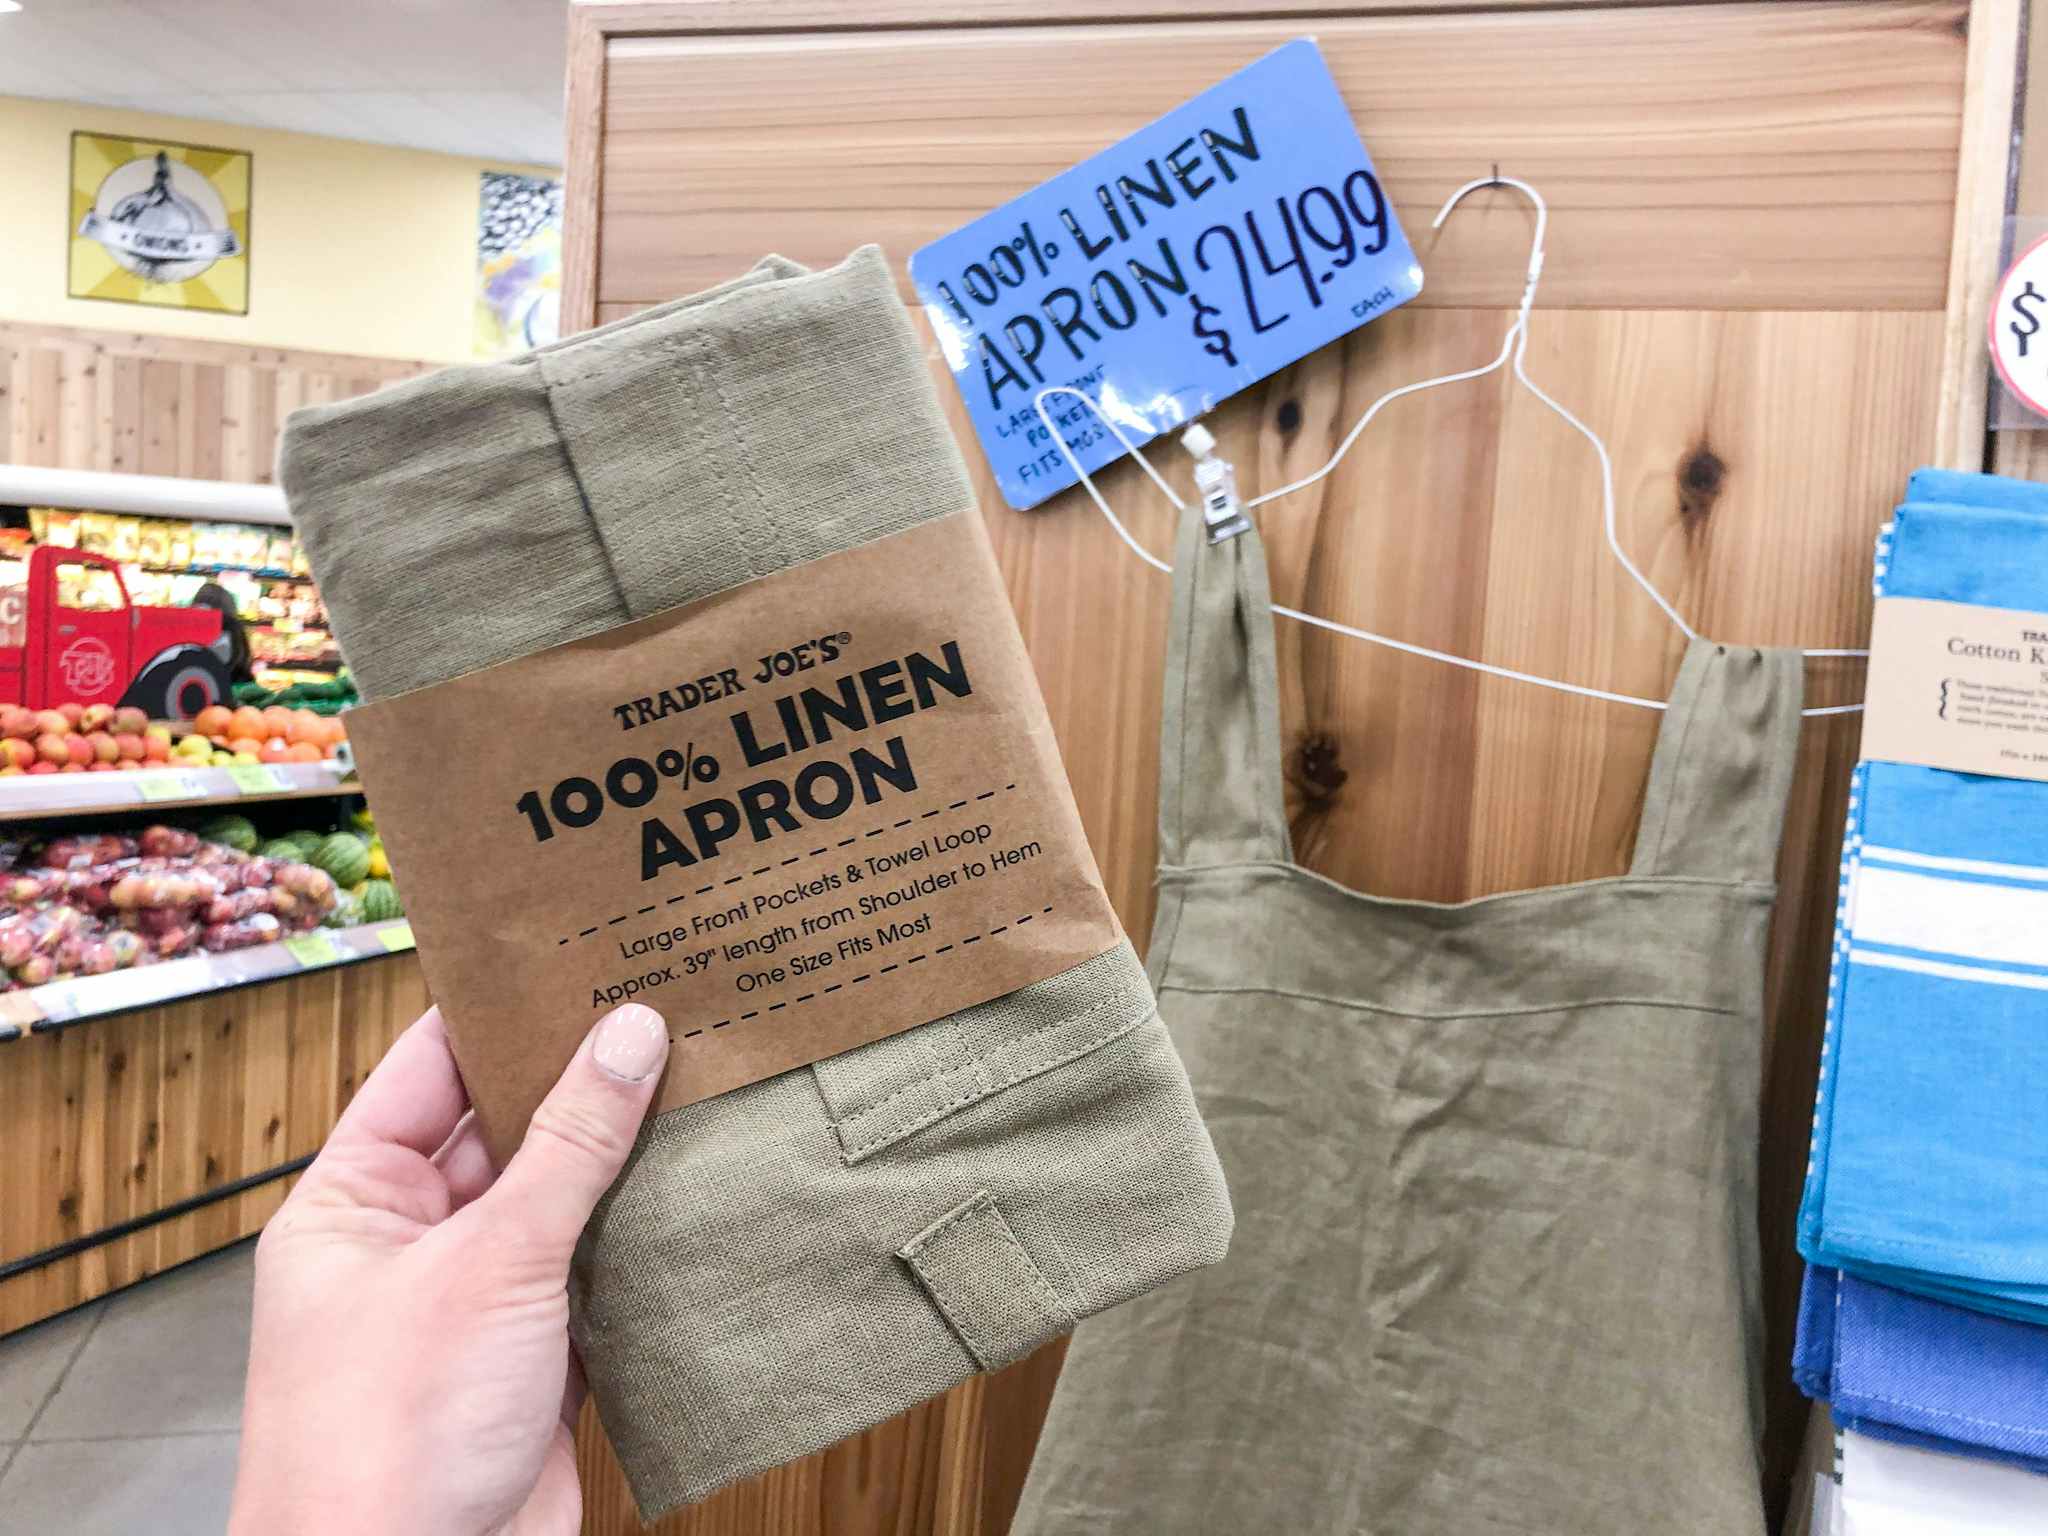 Linen apron in packaging held in front of price tag in Trader Joe's